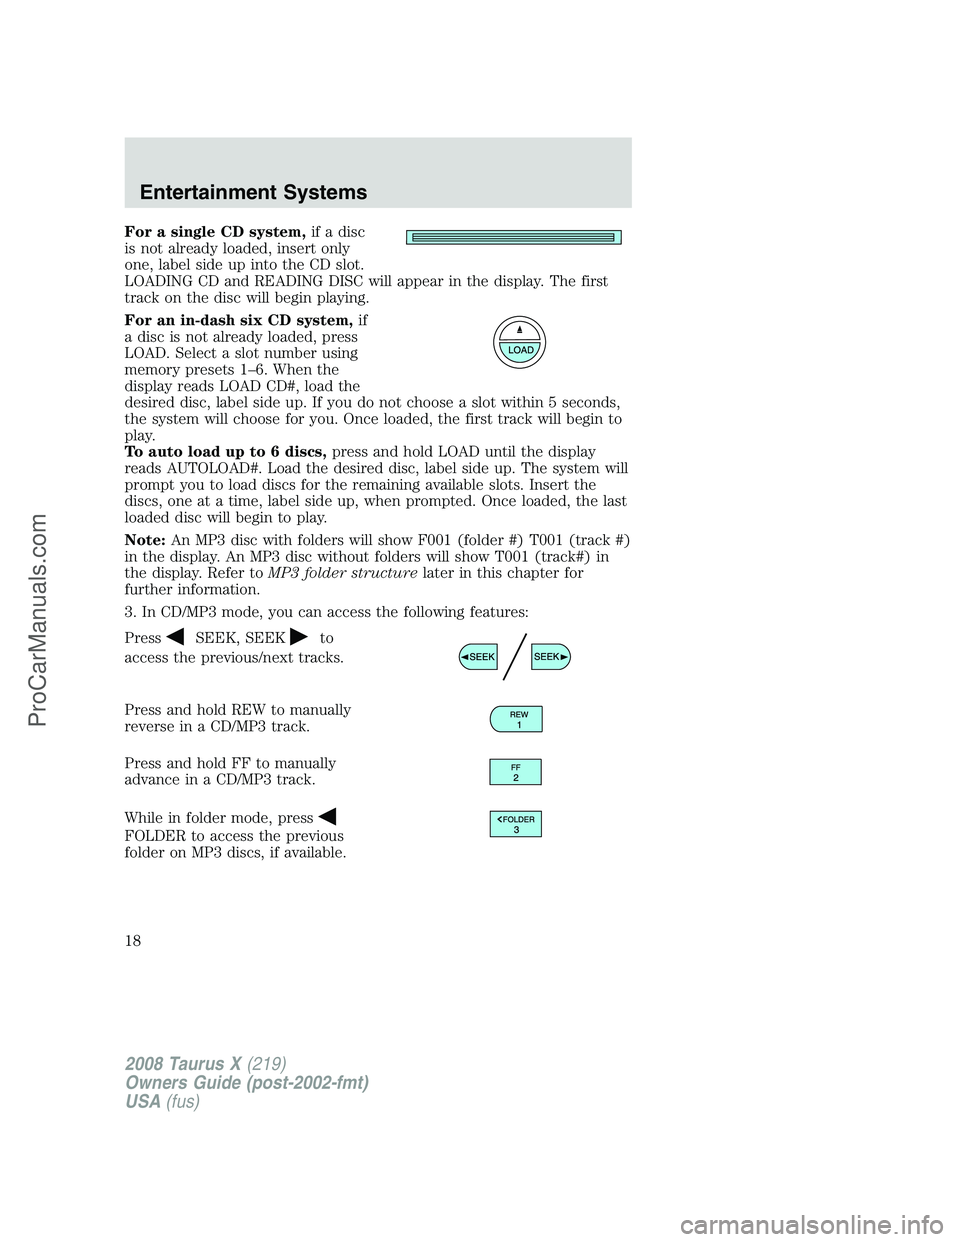 FORD FREESTYLE 2008  Owners Manual For a single CD system,if a disc
is not already loaded, insert only
one, label side up into the CD slot.
LOADING CD and READING DISC will appear in the display. The first
track on the disc will begin 